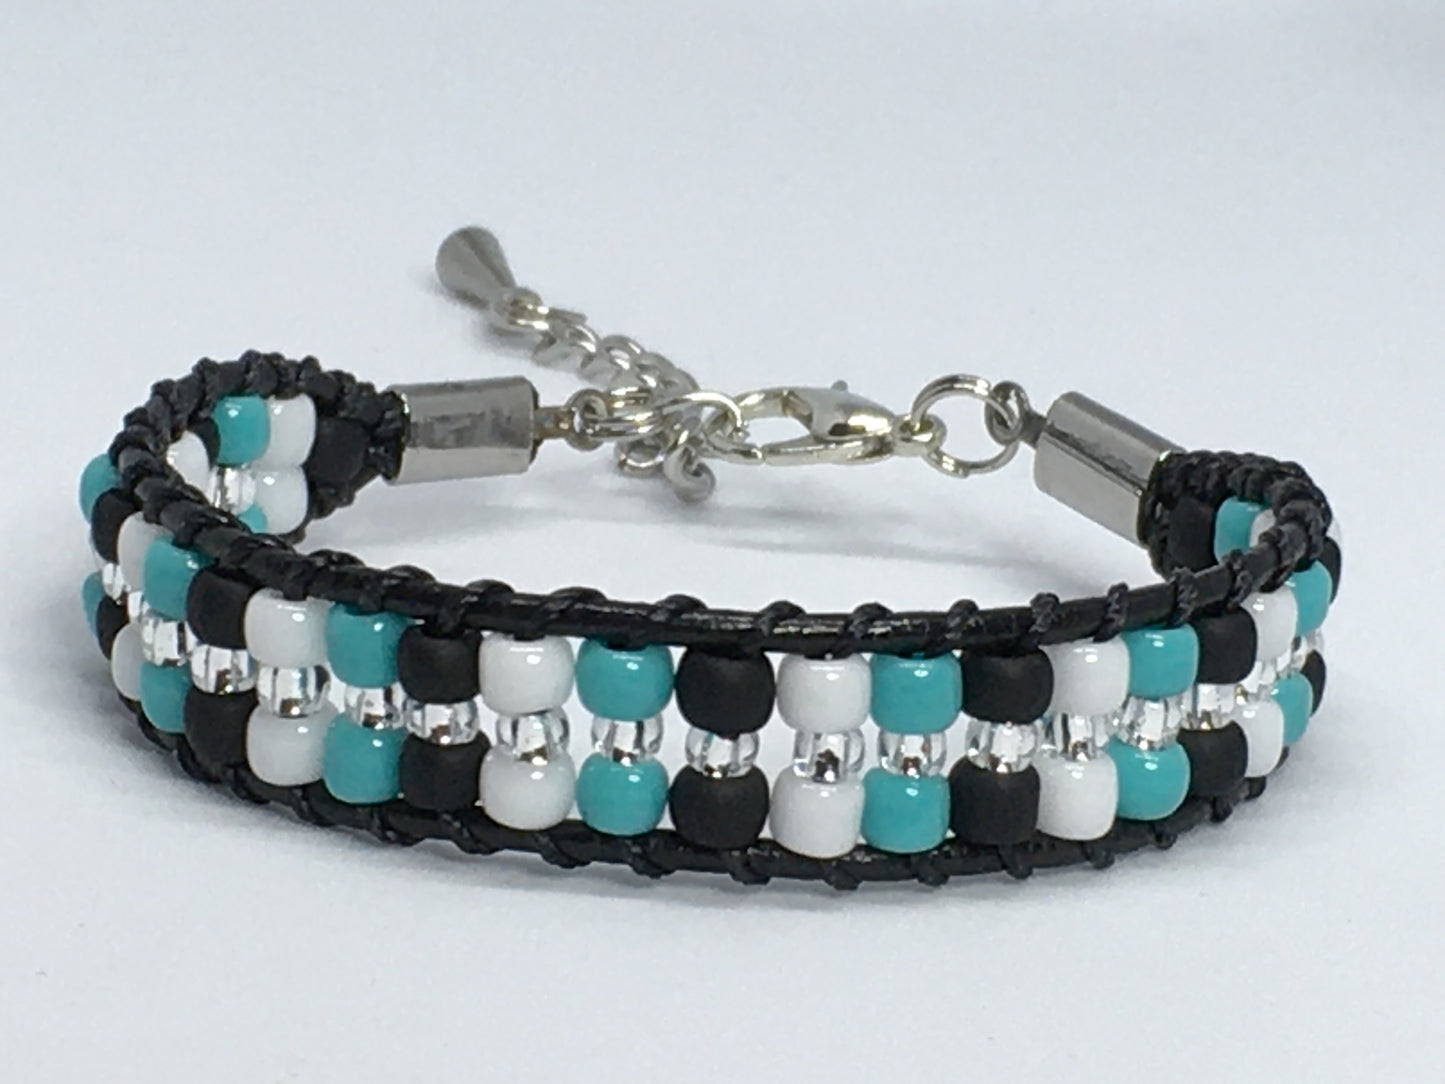 5.75" Bead and Leather Women's Bracelet